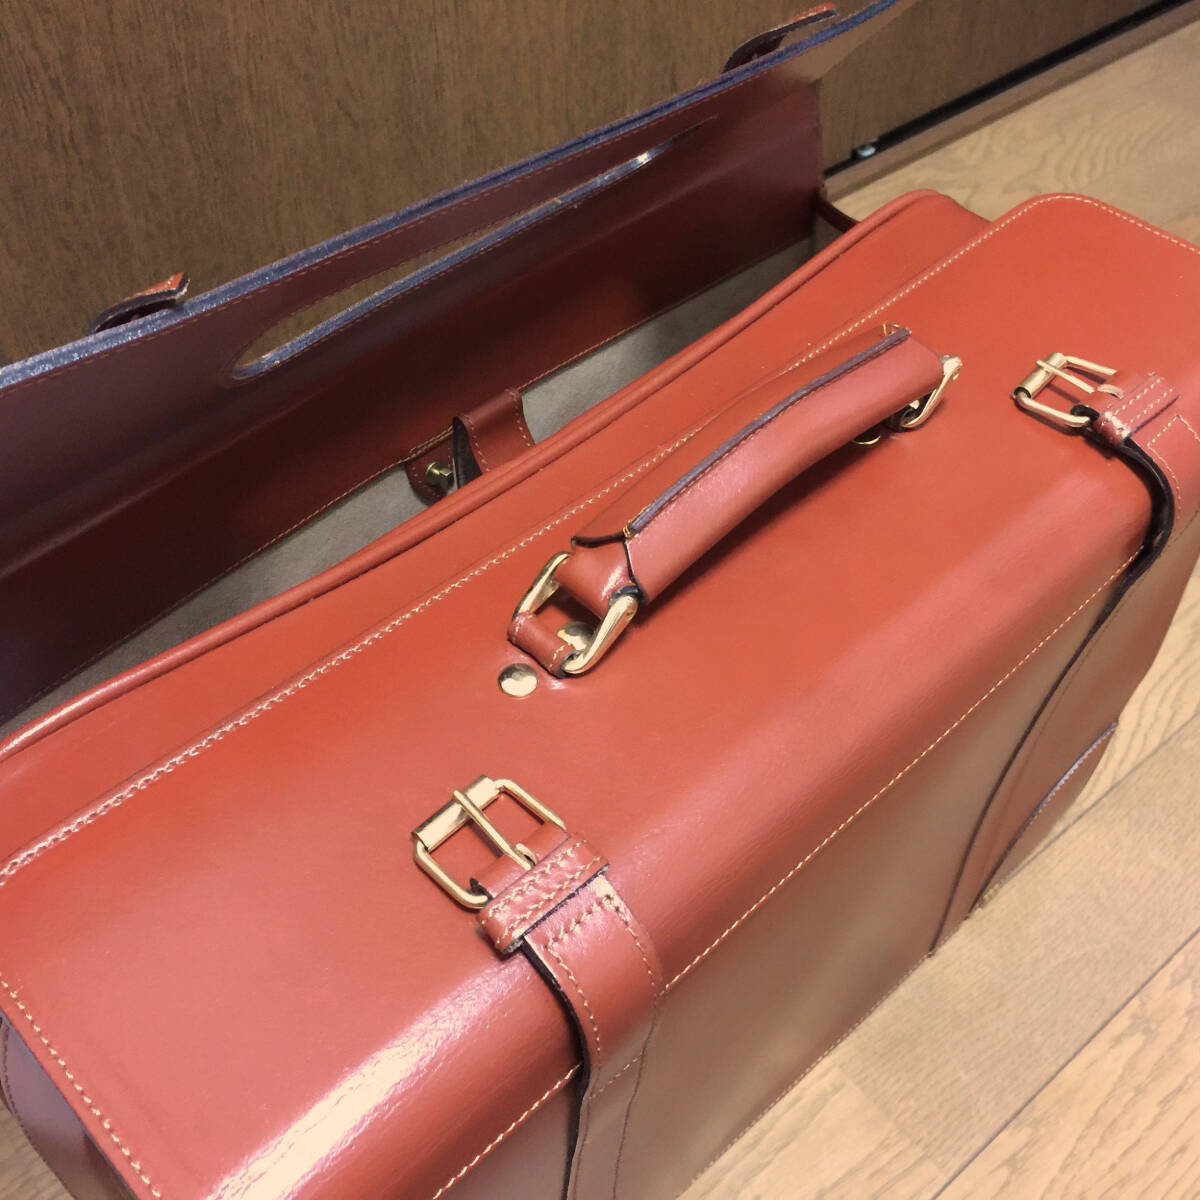  not for sale Italy made Rudi Rabitti x SUZUKI Suzuki special order SKY WAVE cow leather leather trunk Pilot case business bag business trip travel bag tea 